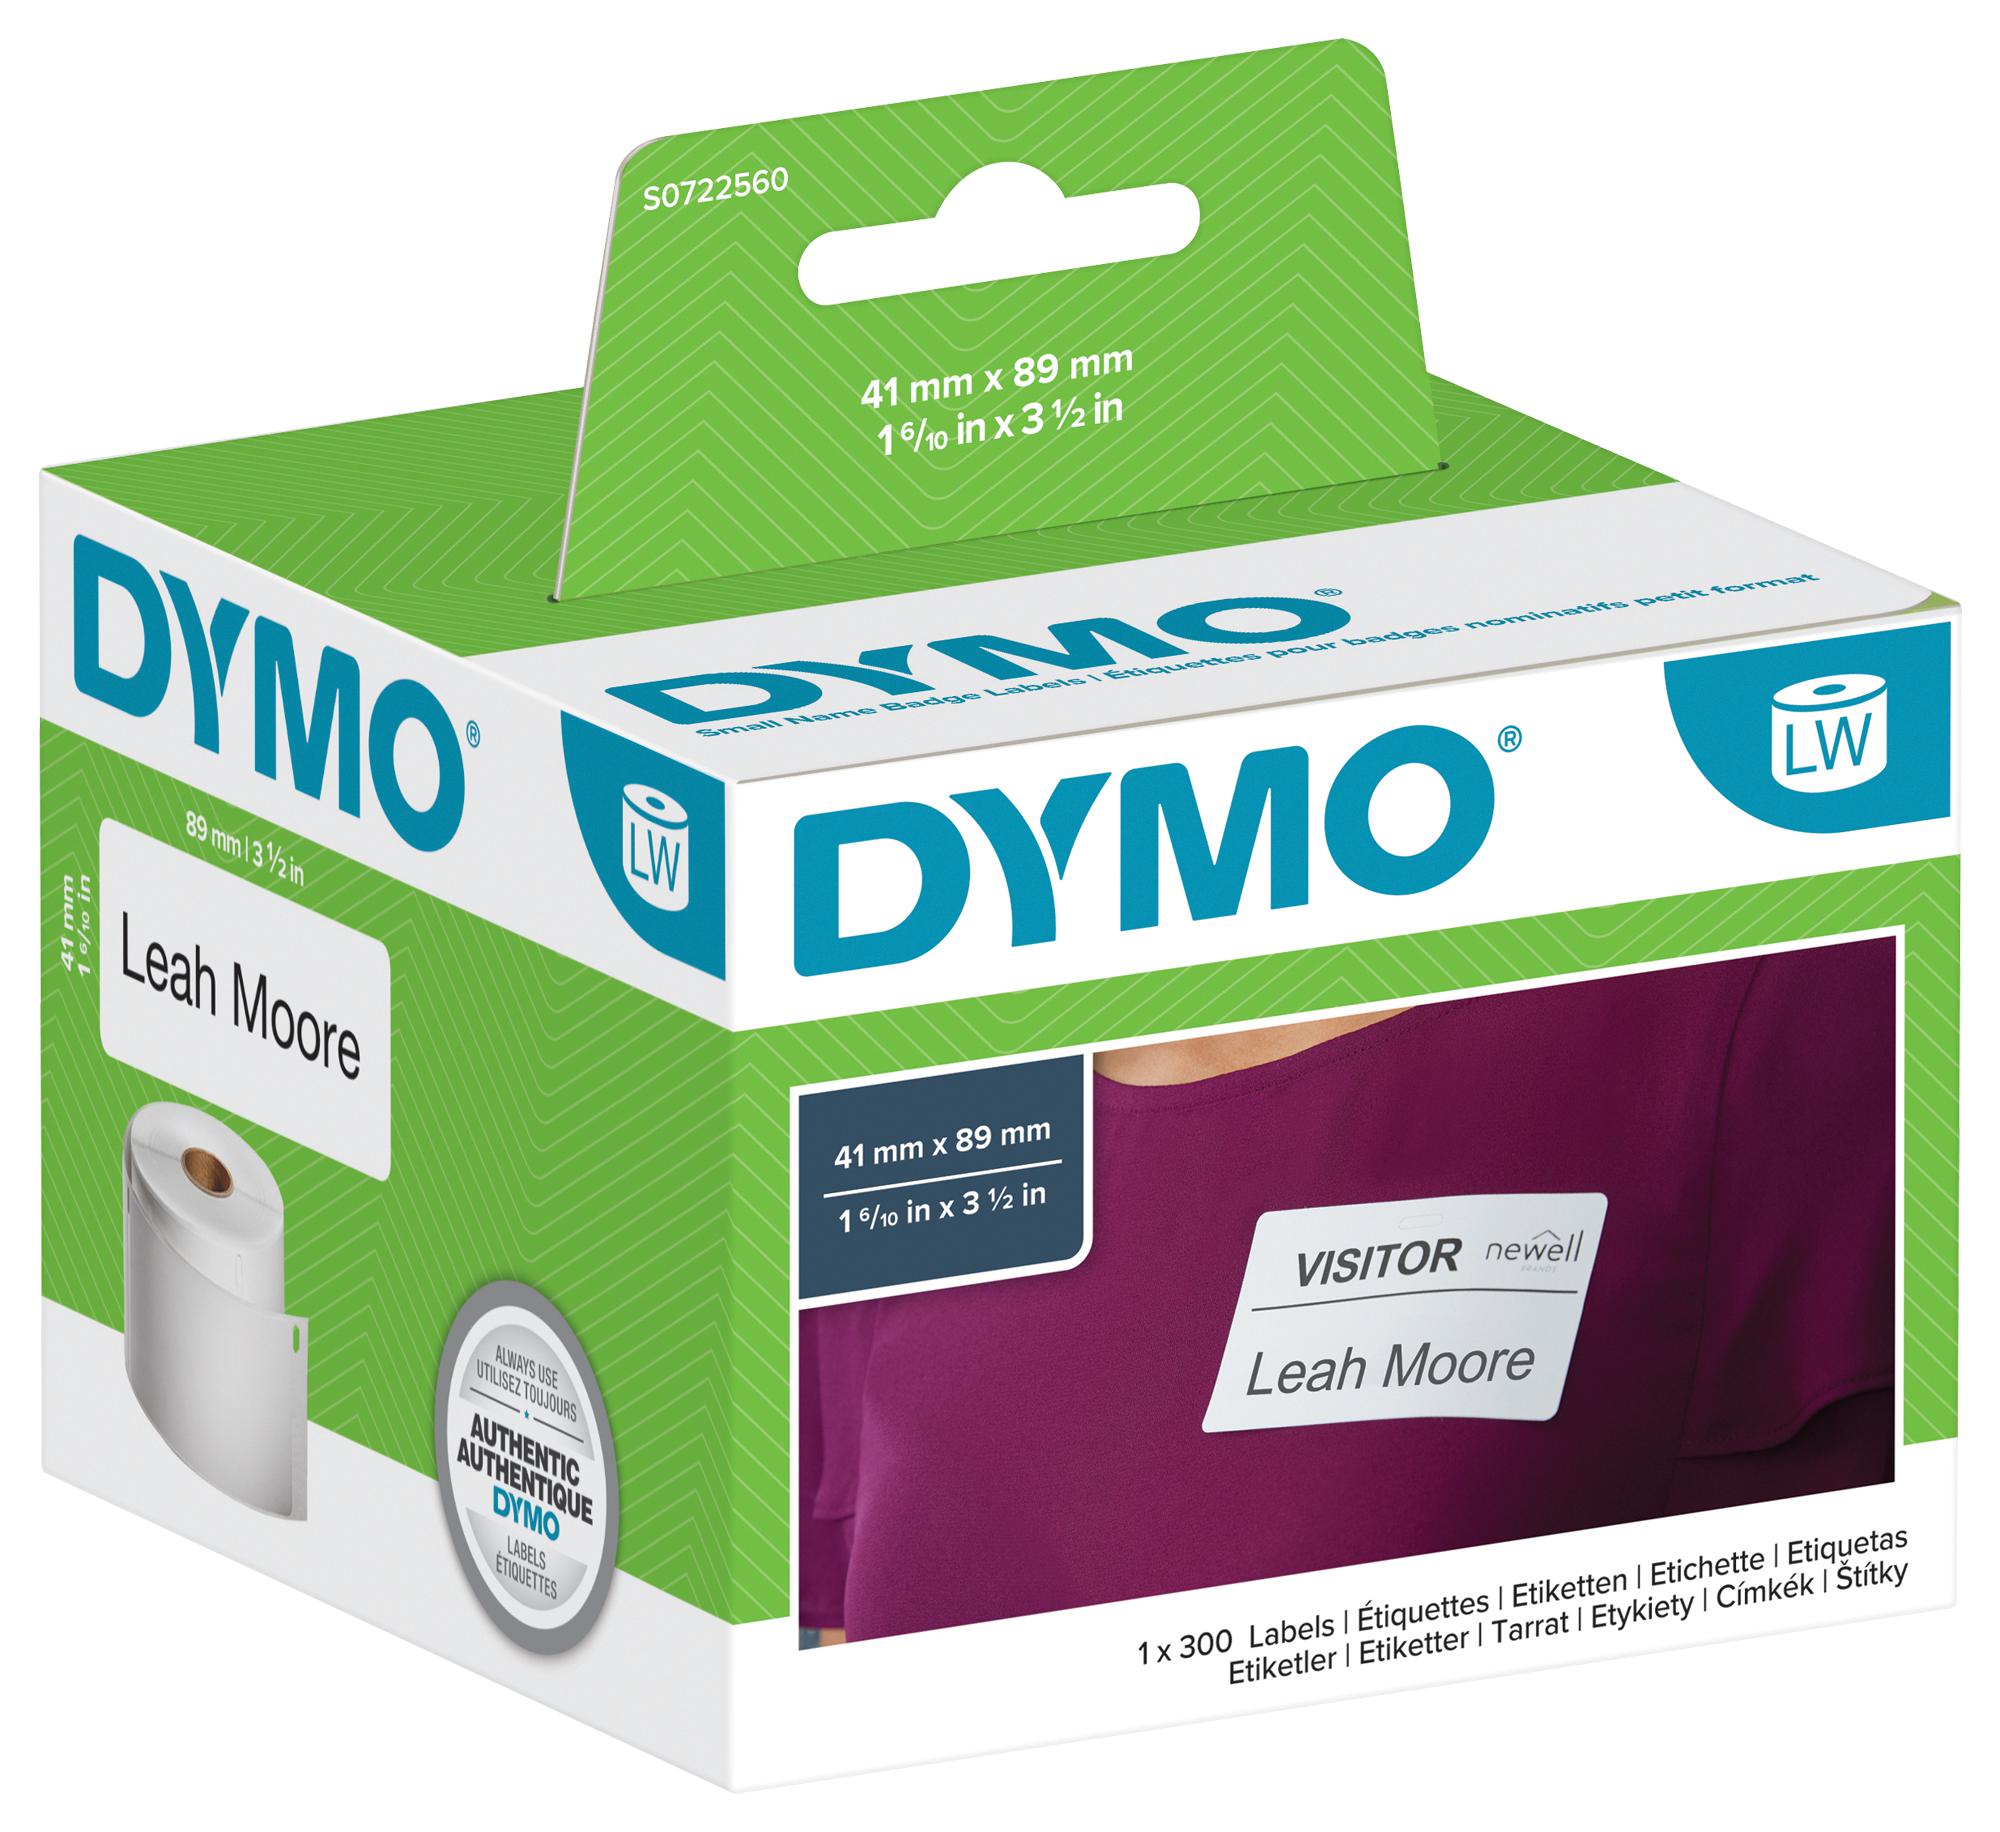 Dymo S0722560 Lw Small Name Badge Labels White